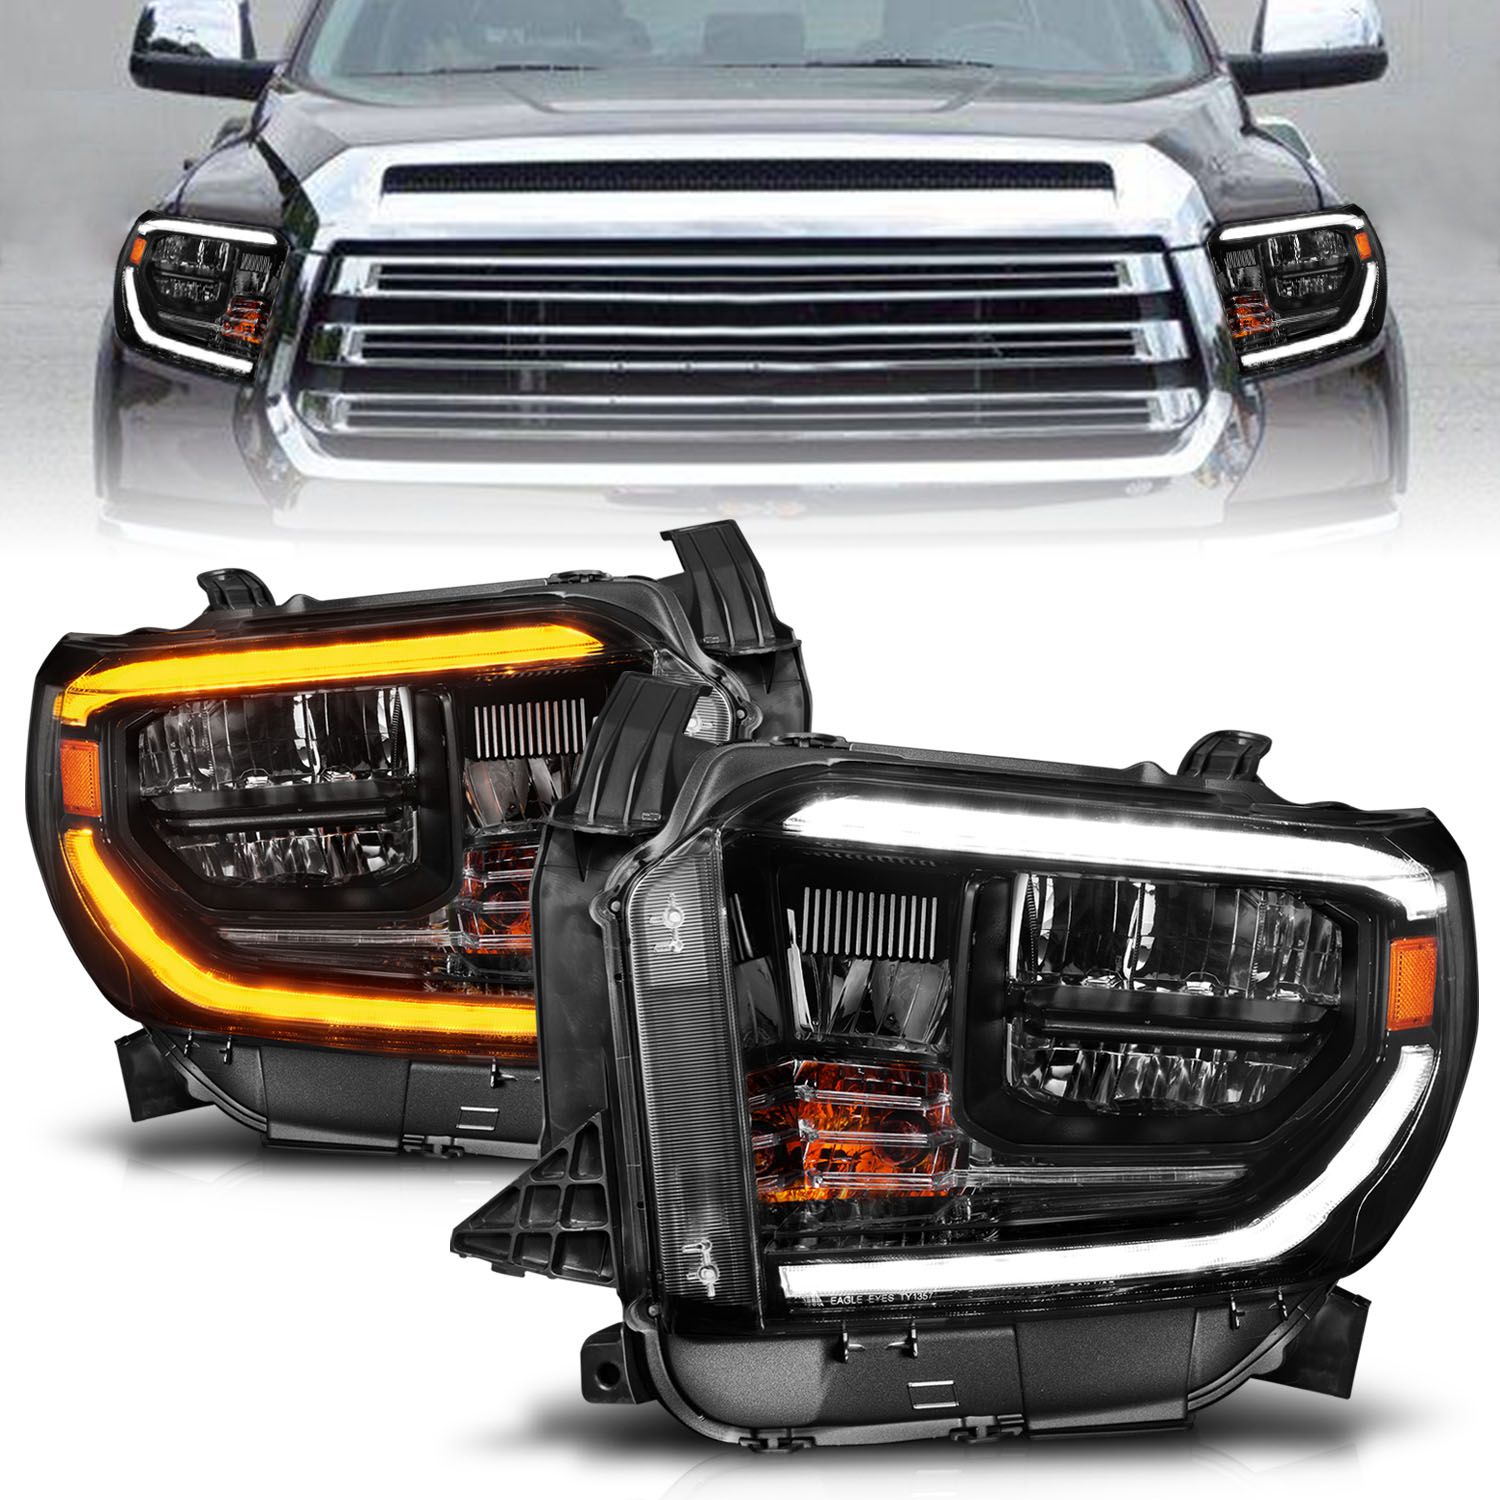 Anzo LED Crystal Switchback Plank Style Headlights Black (Led High/Low Beam) (For Oem Halogen Model W/ Halogen DRL); 2014-2017 Tundra